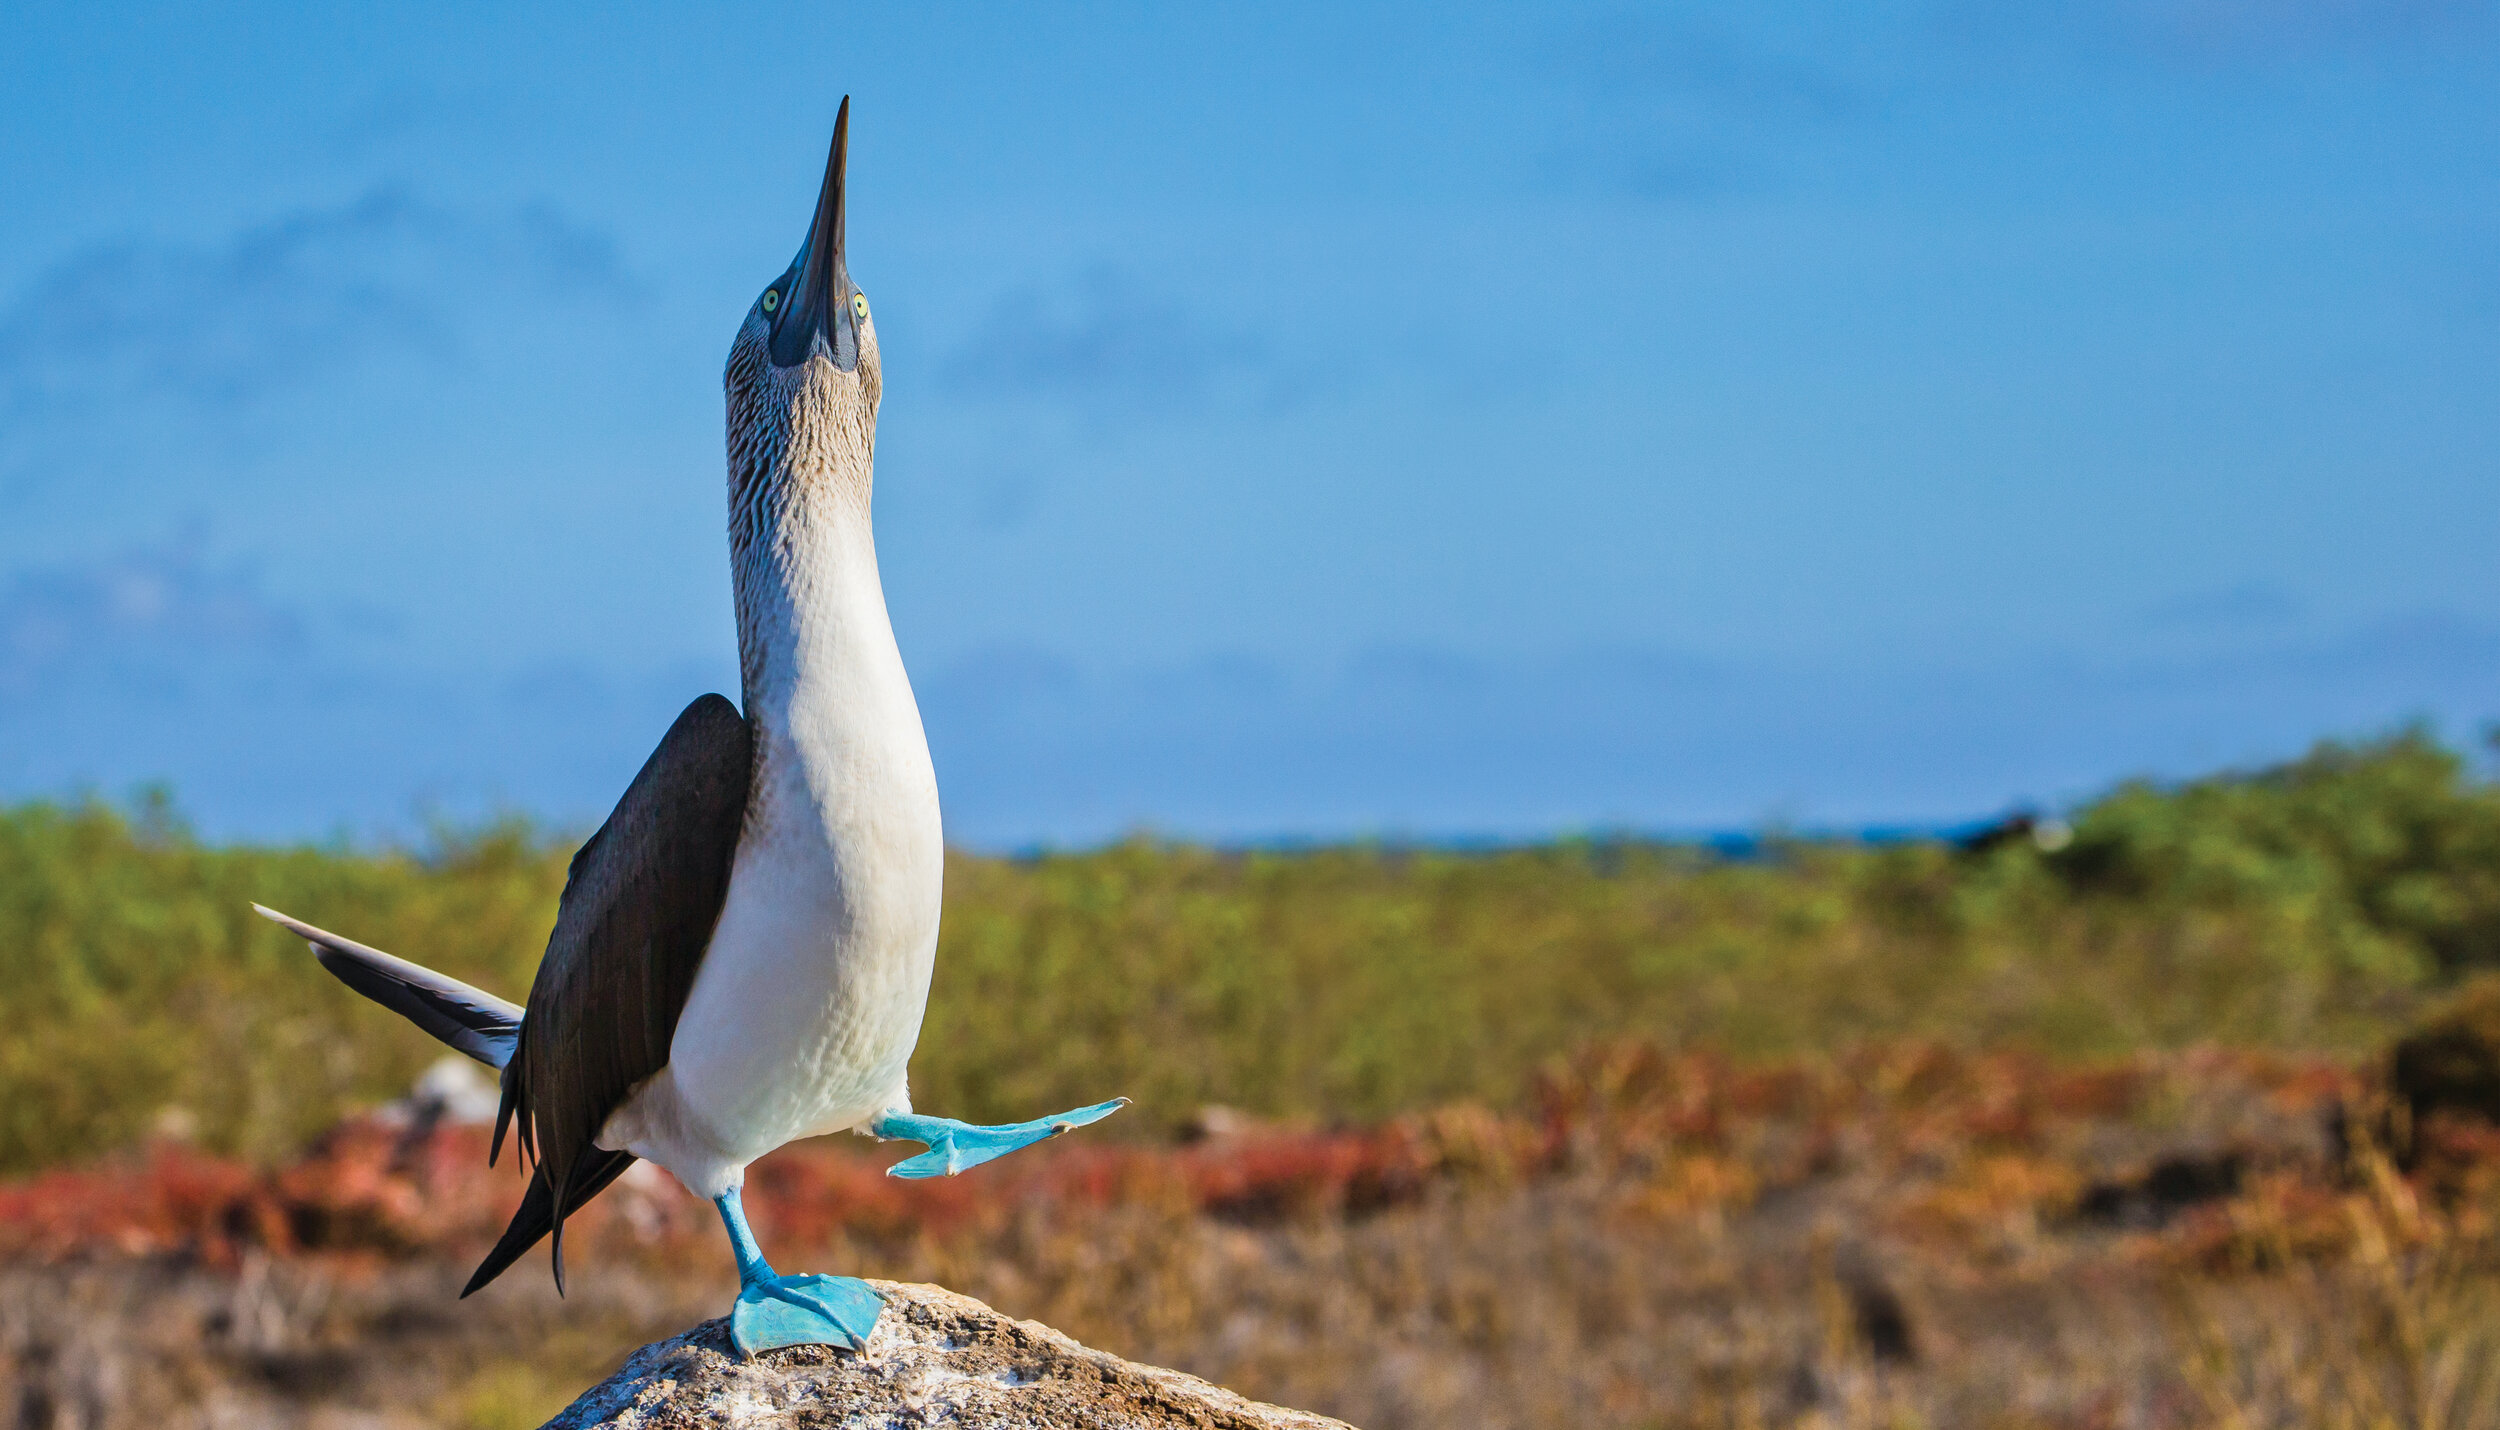   A blue-footed booby’s courtship display on North Seymour Island (photo credit: Lindblad Expeditions)  